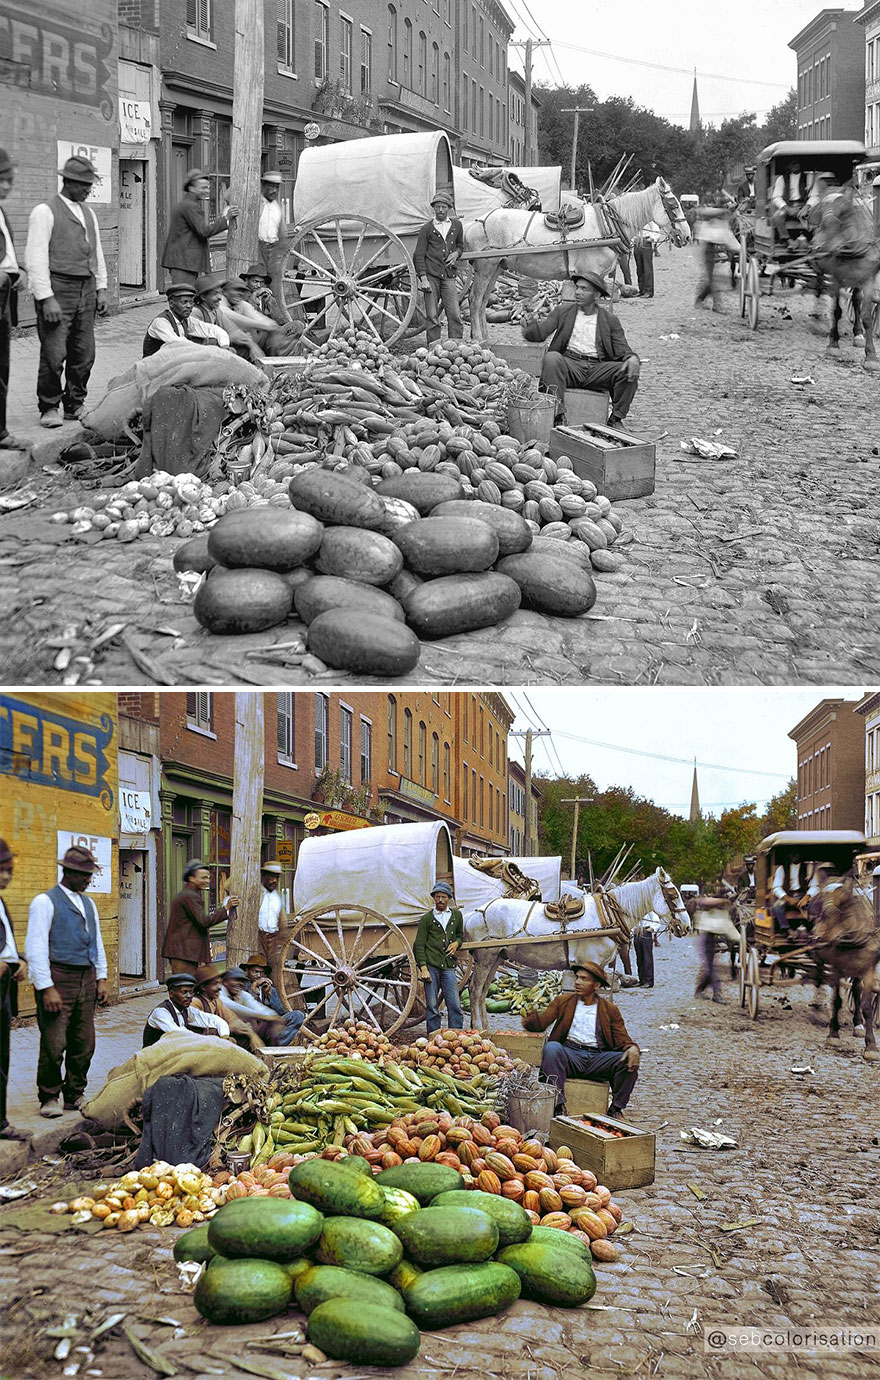 colorized historical pictures - produce